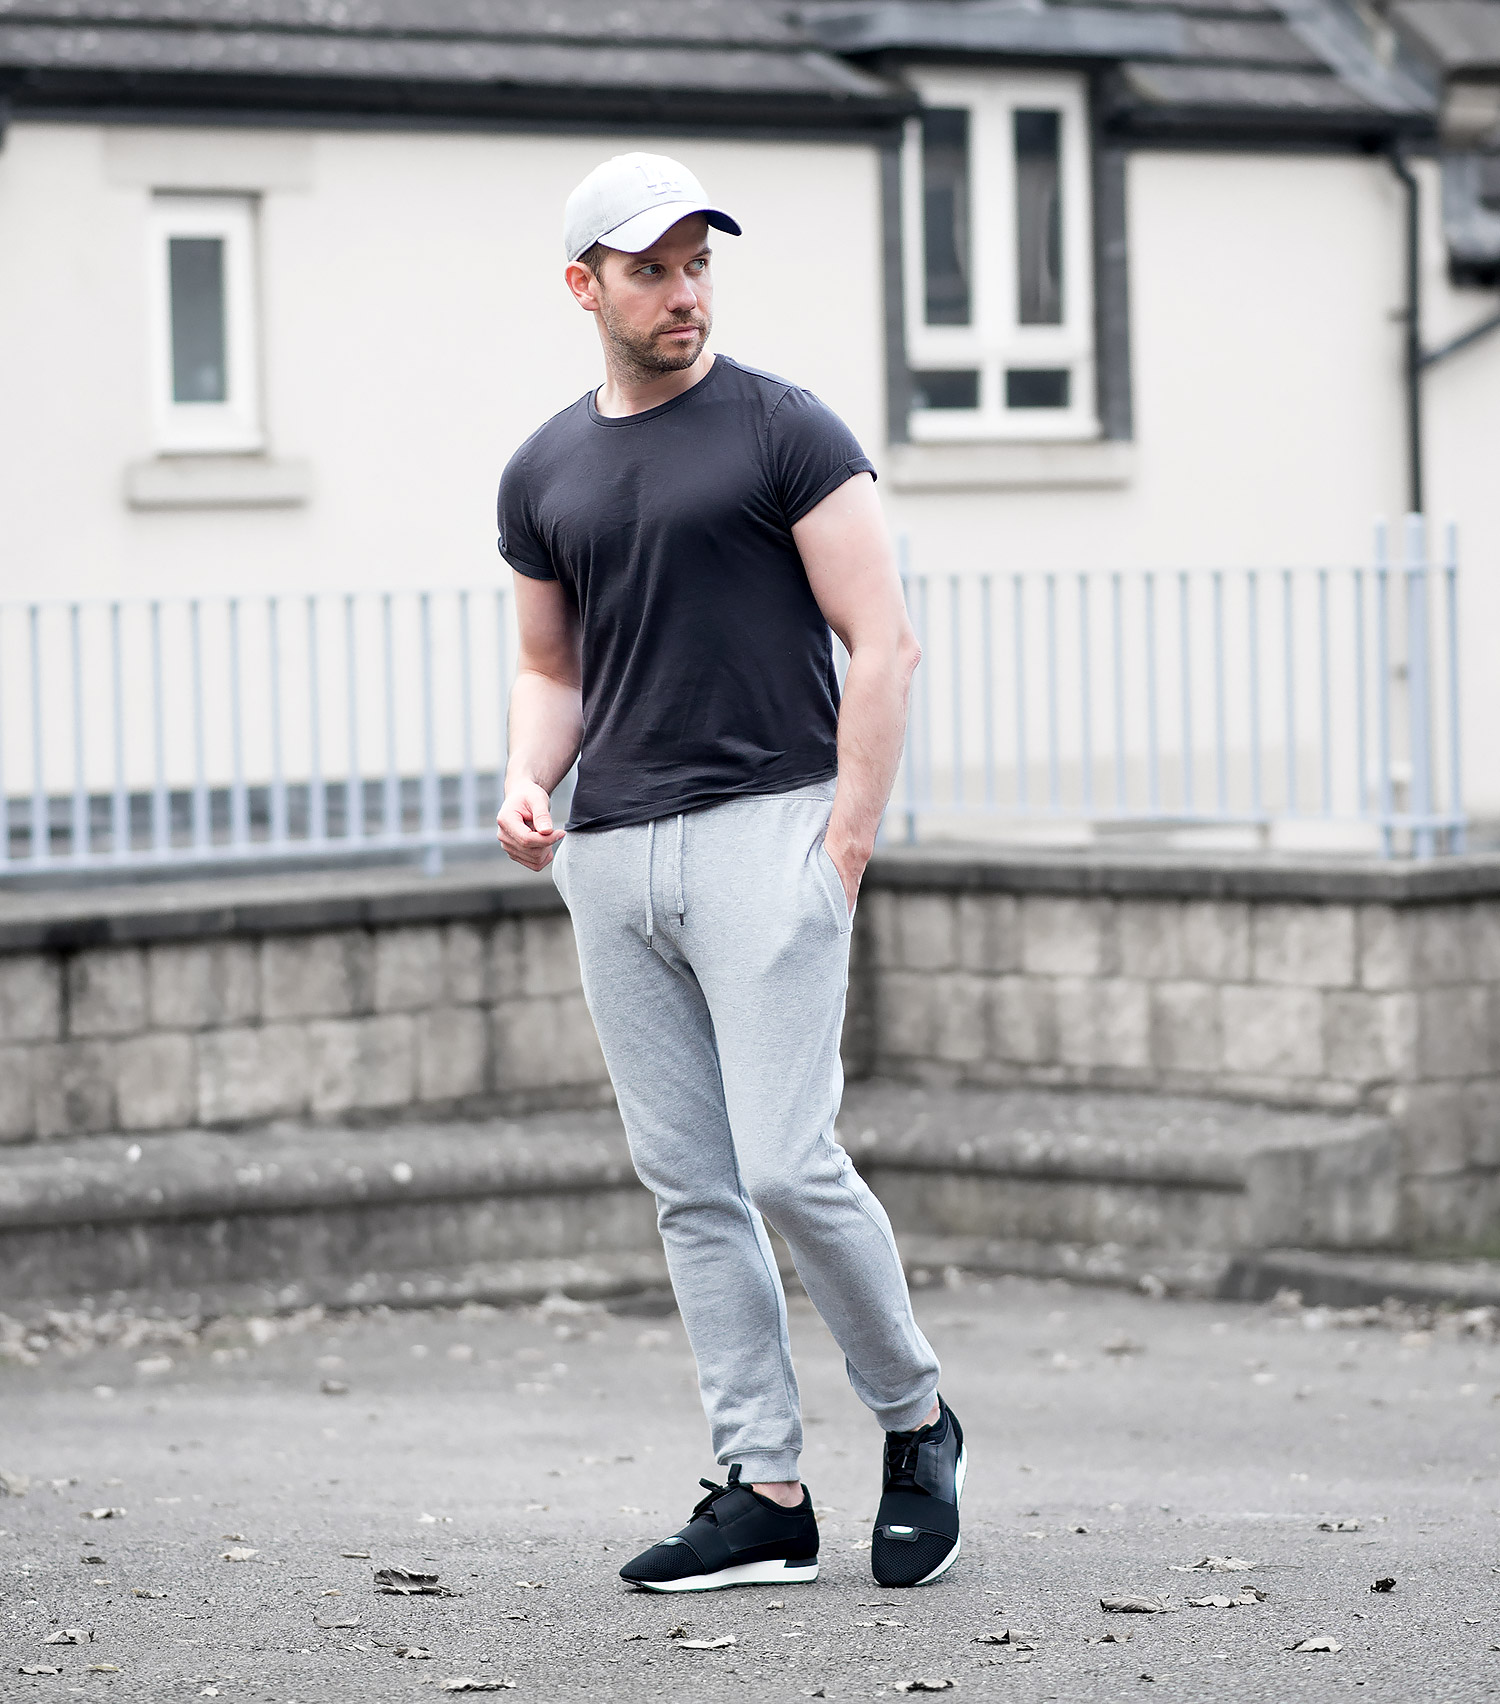 Topman Joggers Balenciaga Race Runners Outfit - Your Average Guy